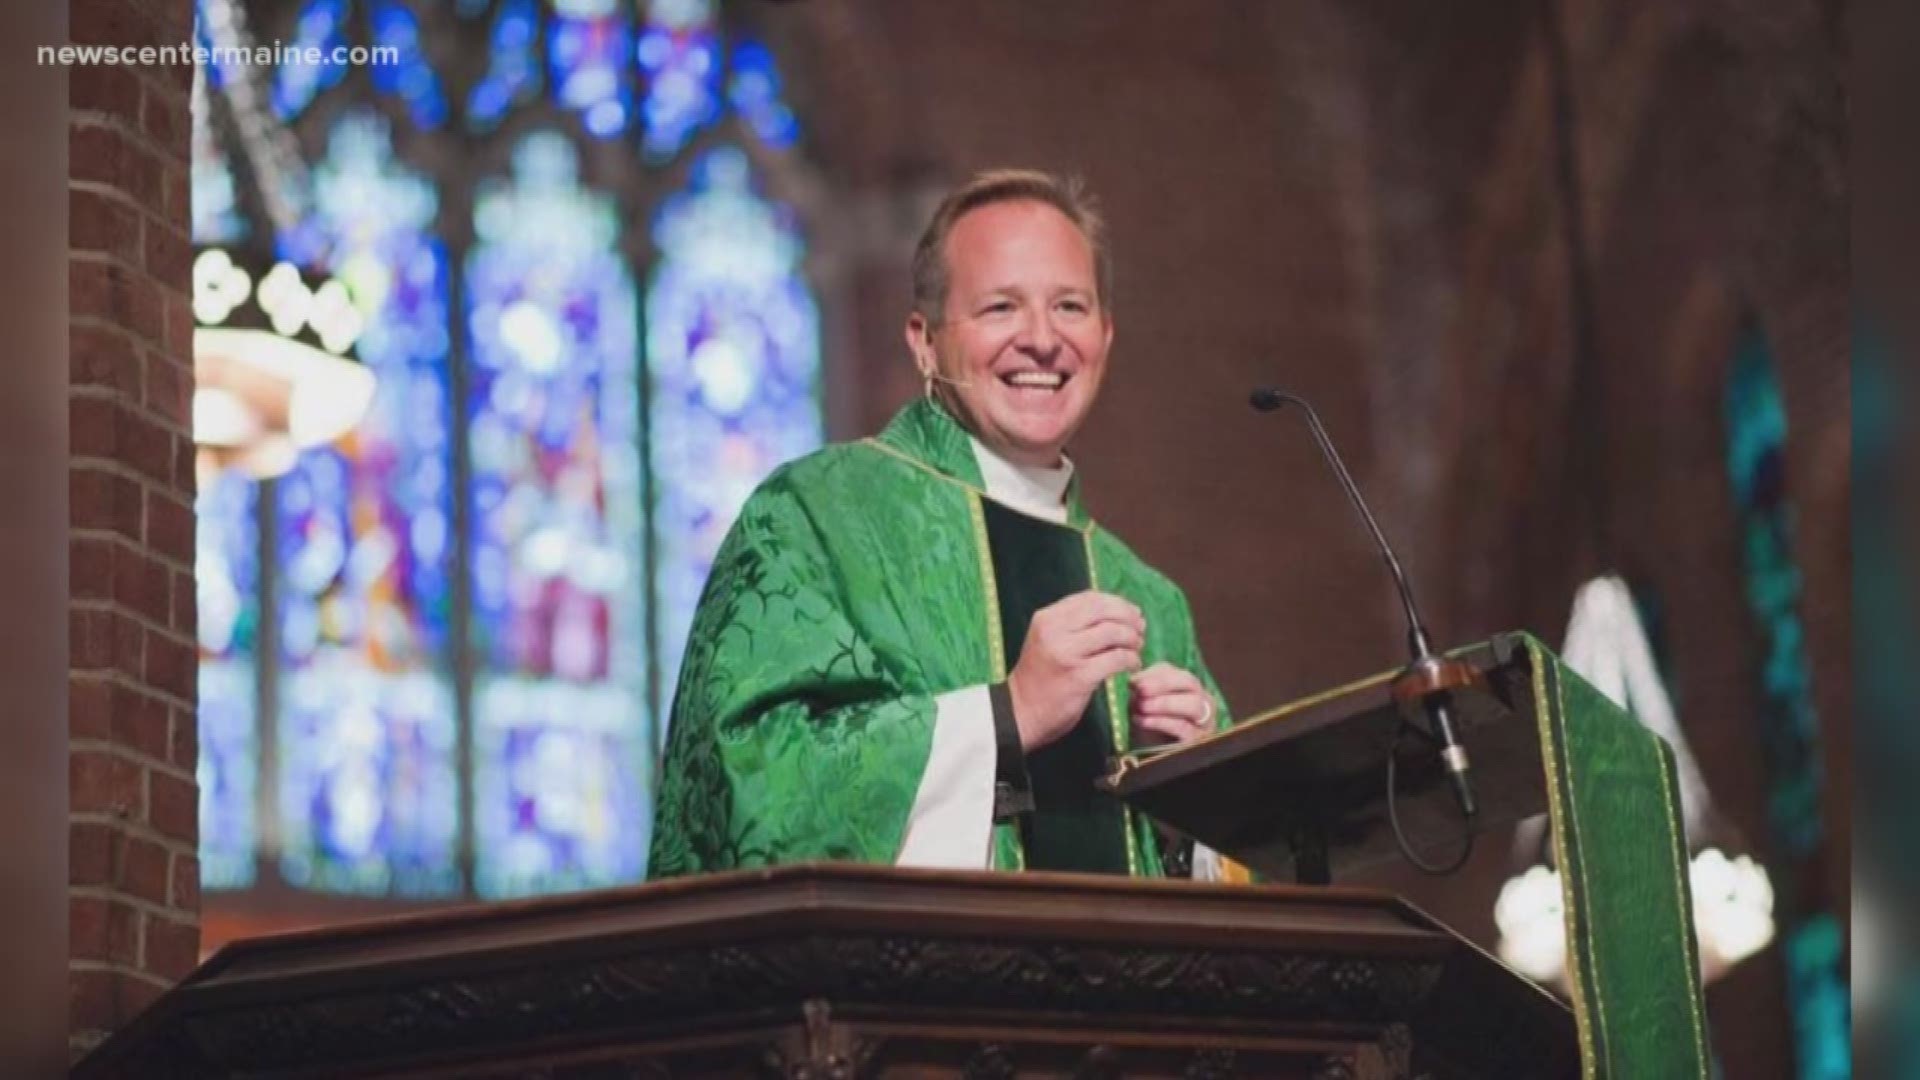 Pending final confirmation -- Reverand Thomas James Brown will be the first openly gay Episcopalian bishop in Maine.